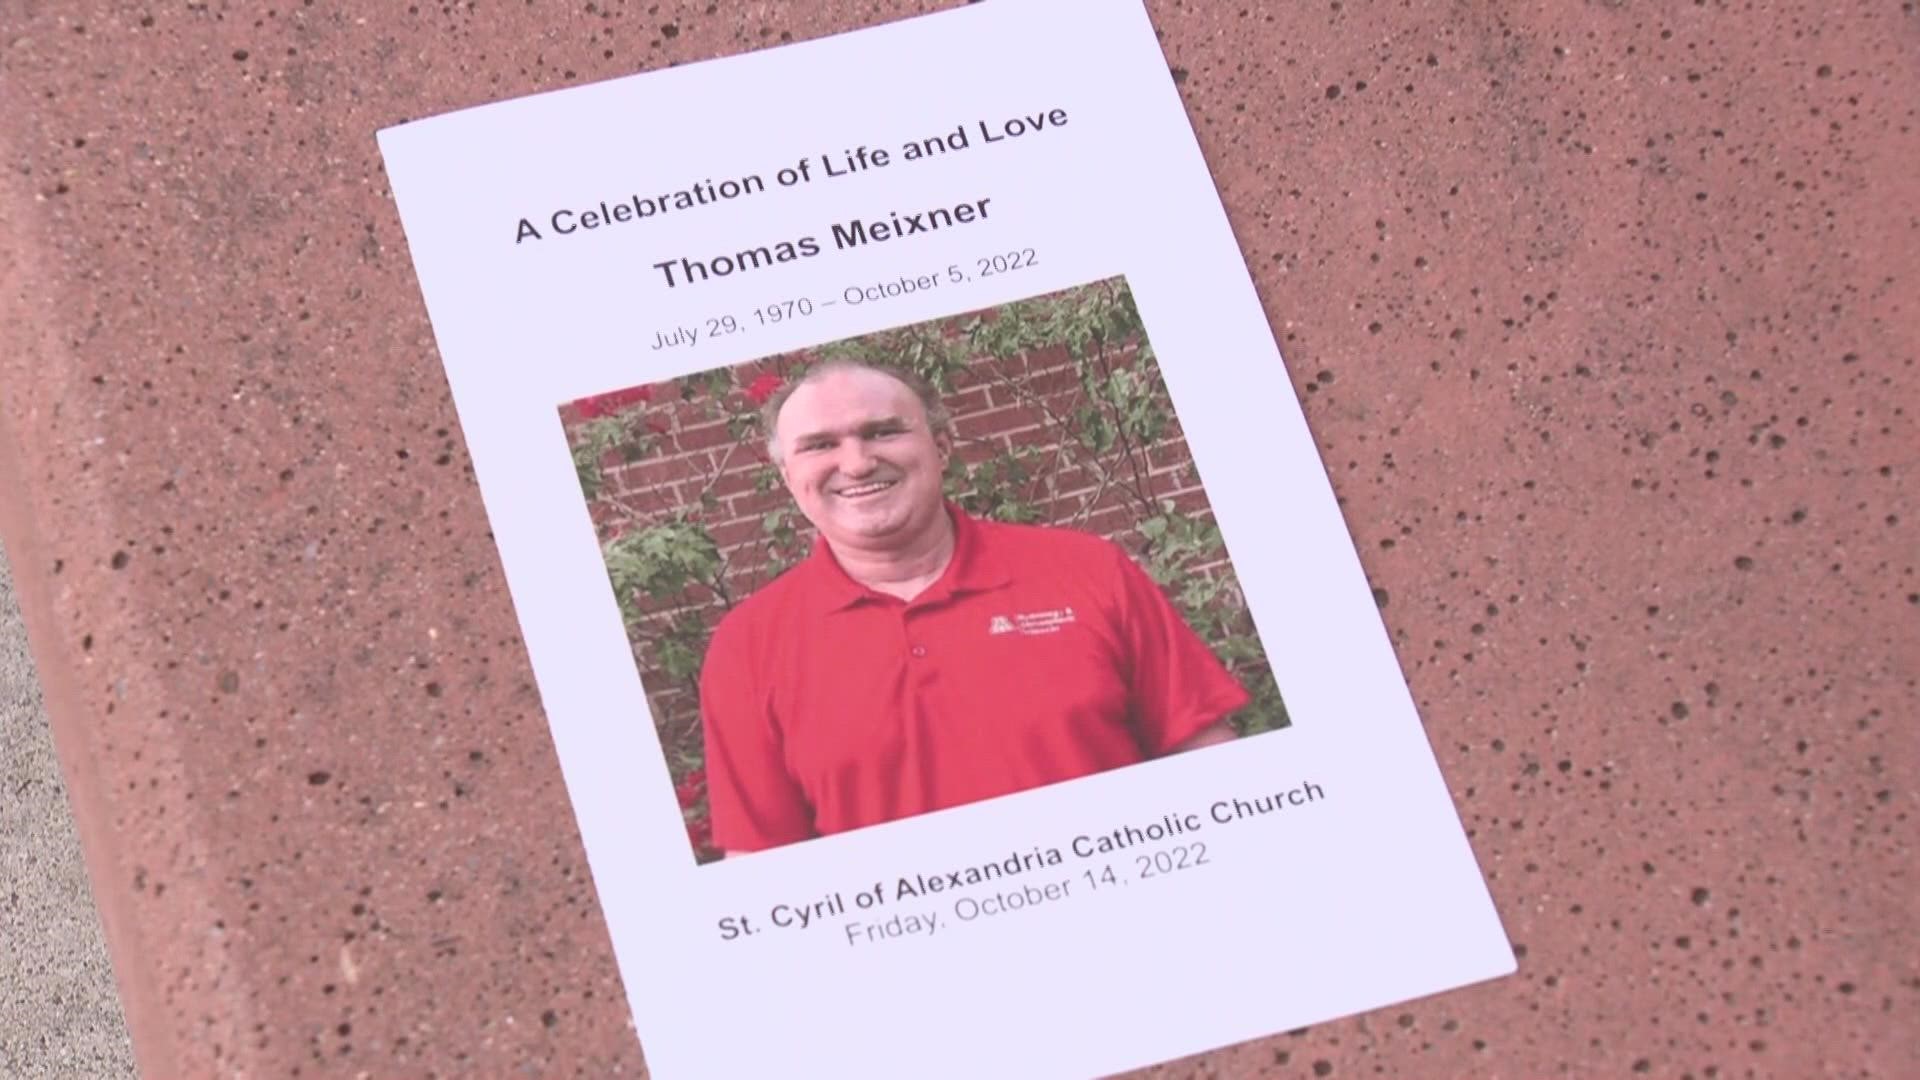 A private funeral service was held Friday for University of Arizona professor Thomas Meixner, who was shot four times on the Tucson campus last week.